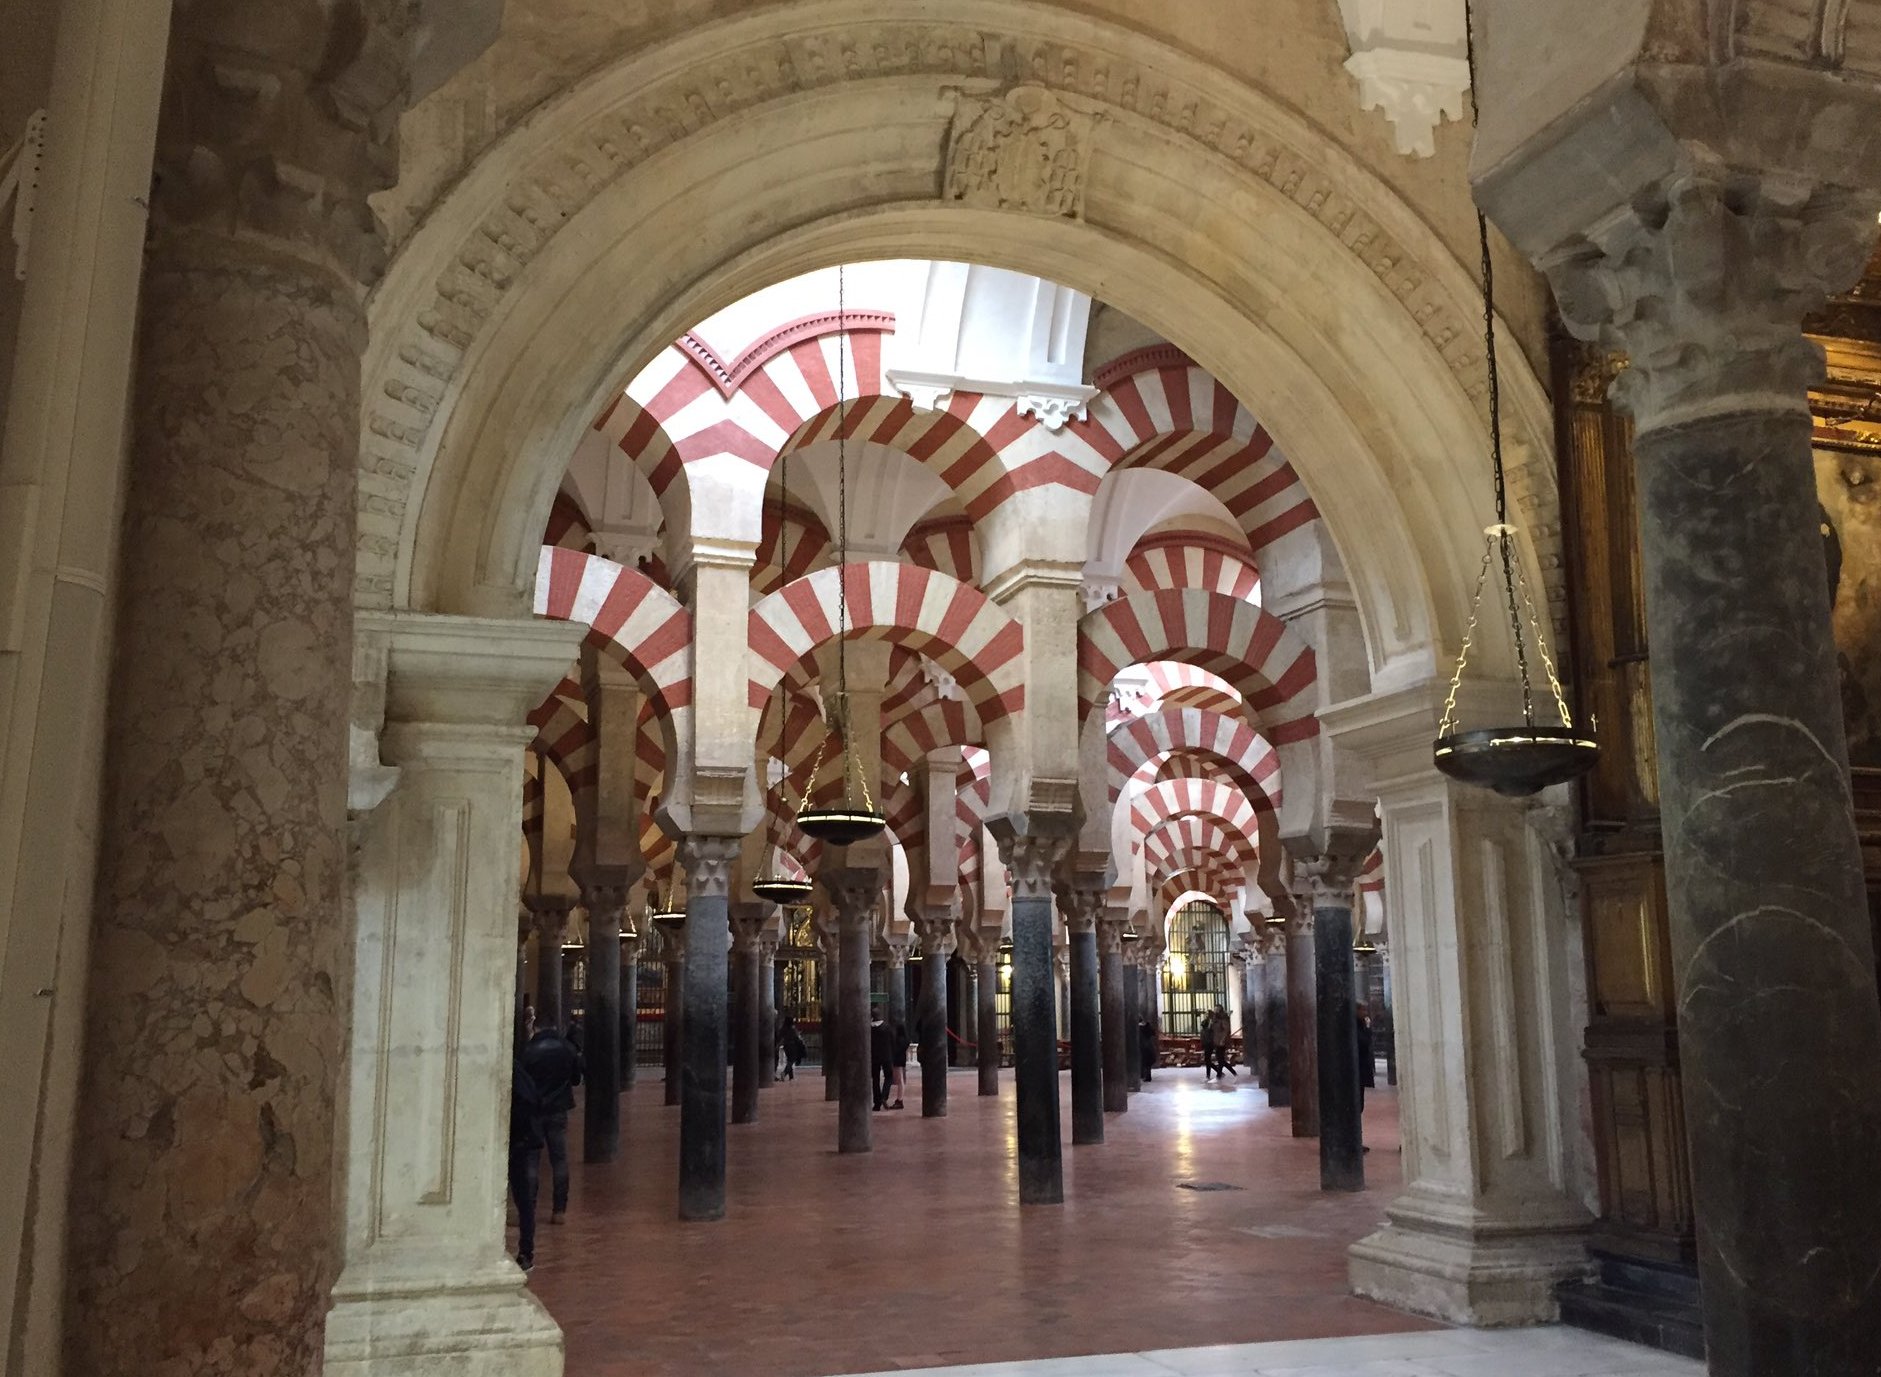 CIPREA delegates will have easy Access to visit the Mosque-Cathedral of Cordoba